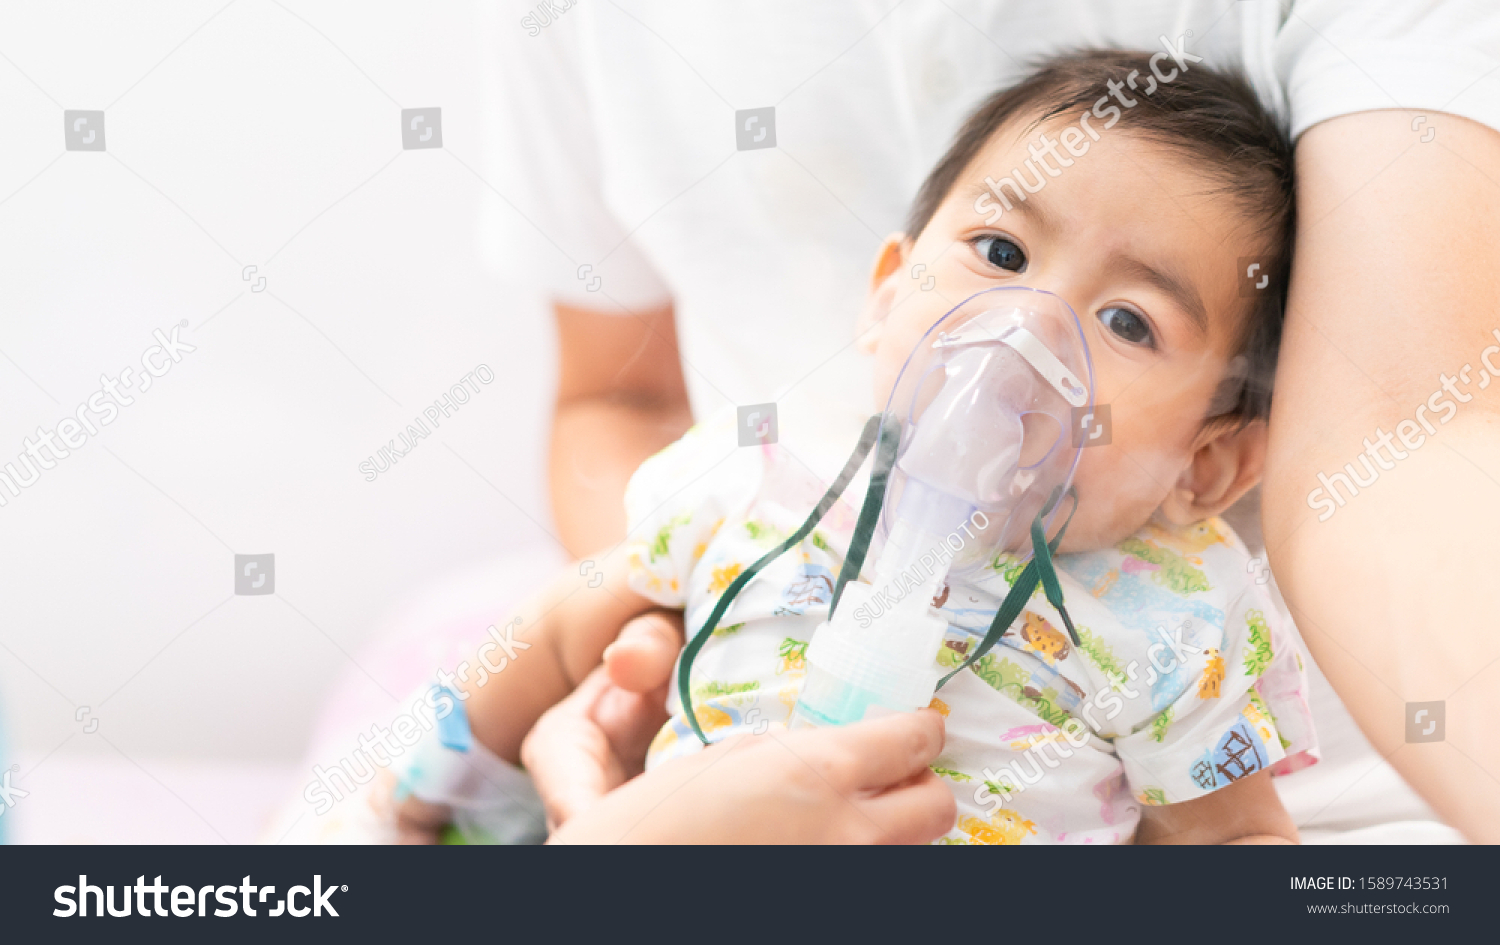 Close up of asian little baby boy is treated respiratory problem with vapor nebulizer to relief cough symptom in the hospital room , concept of pediatric patient care for sick in the hospital. #1589743531